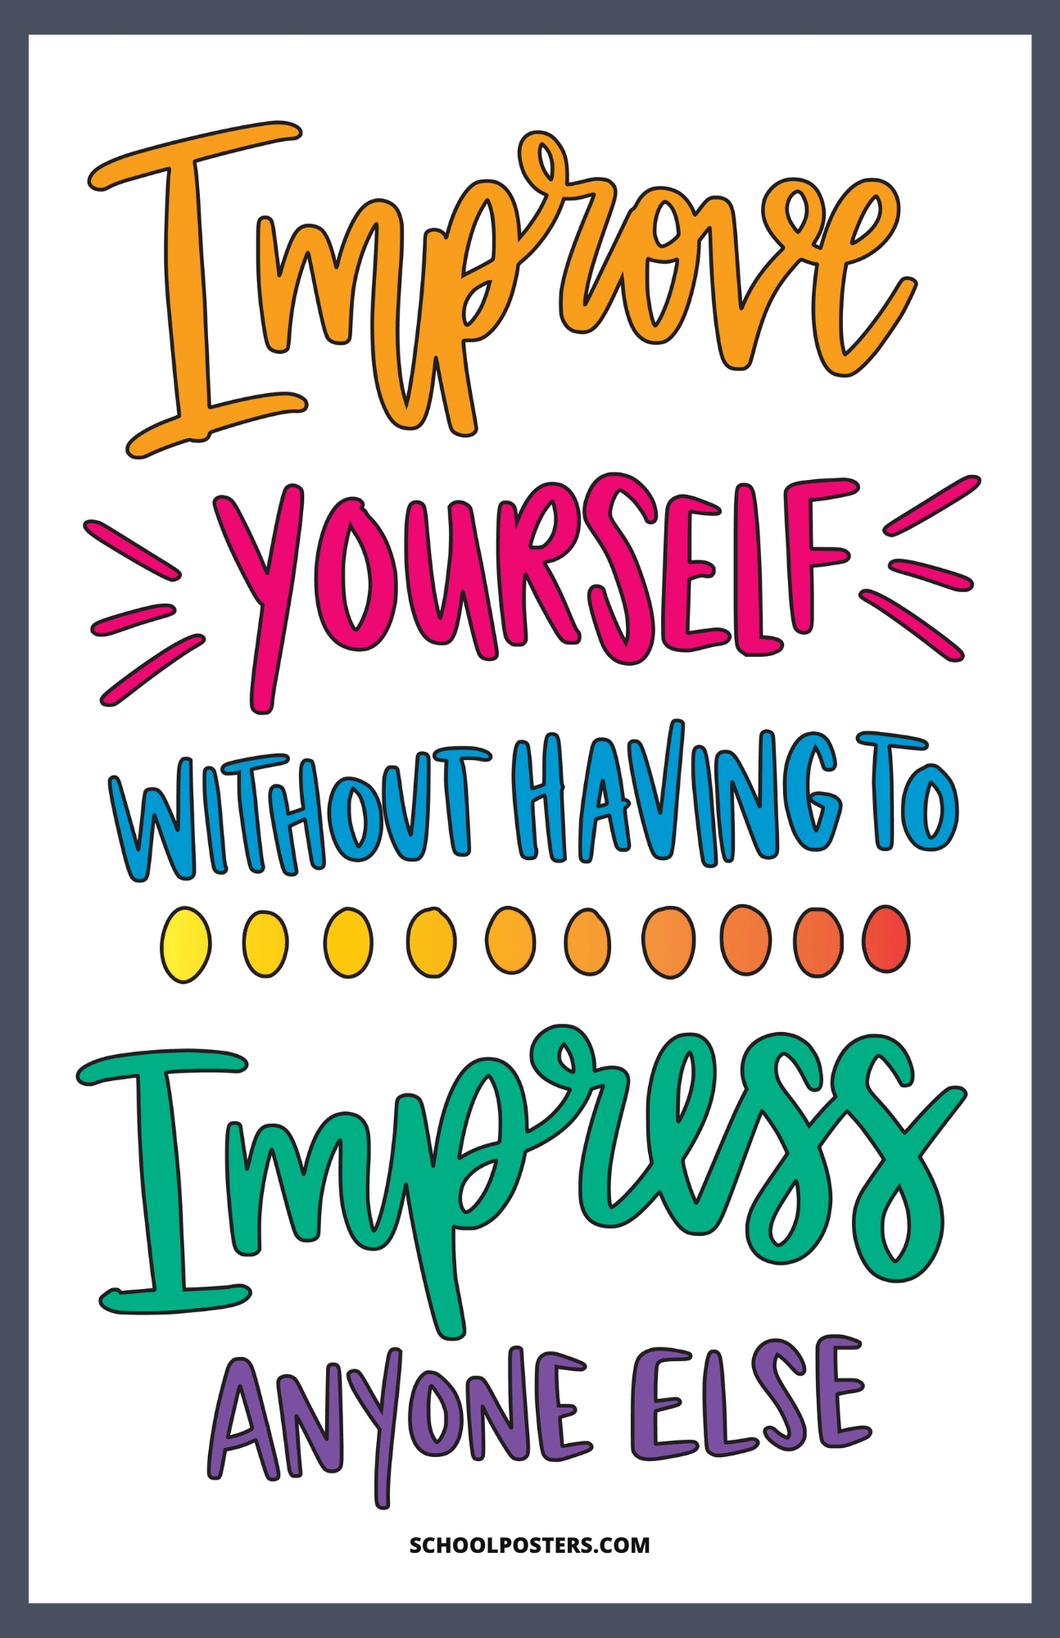 Improve Yourself Poster